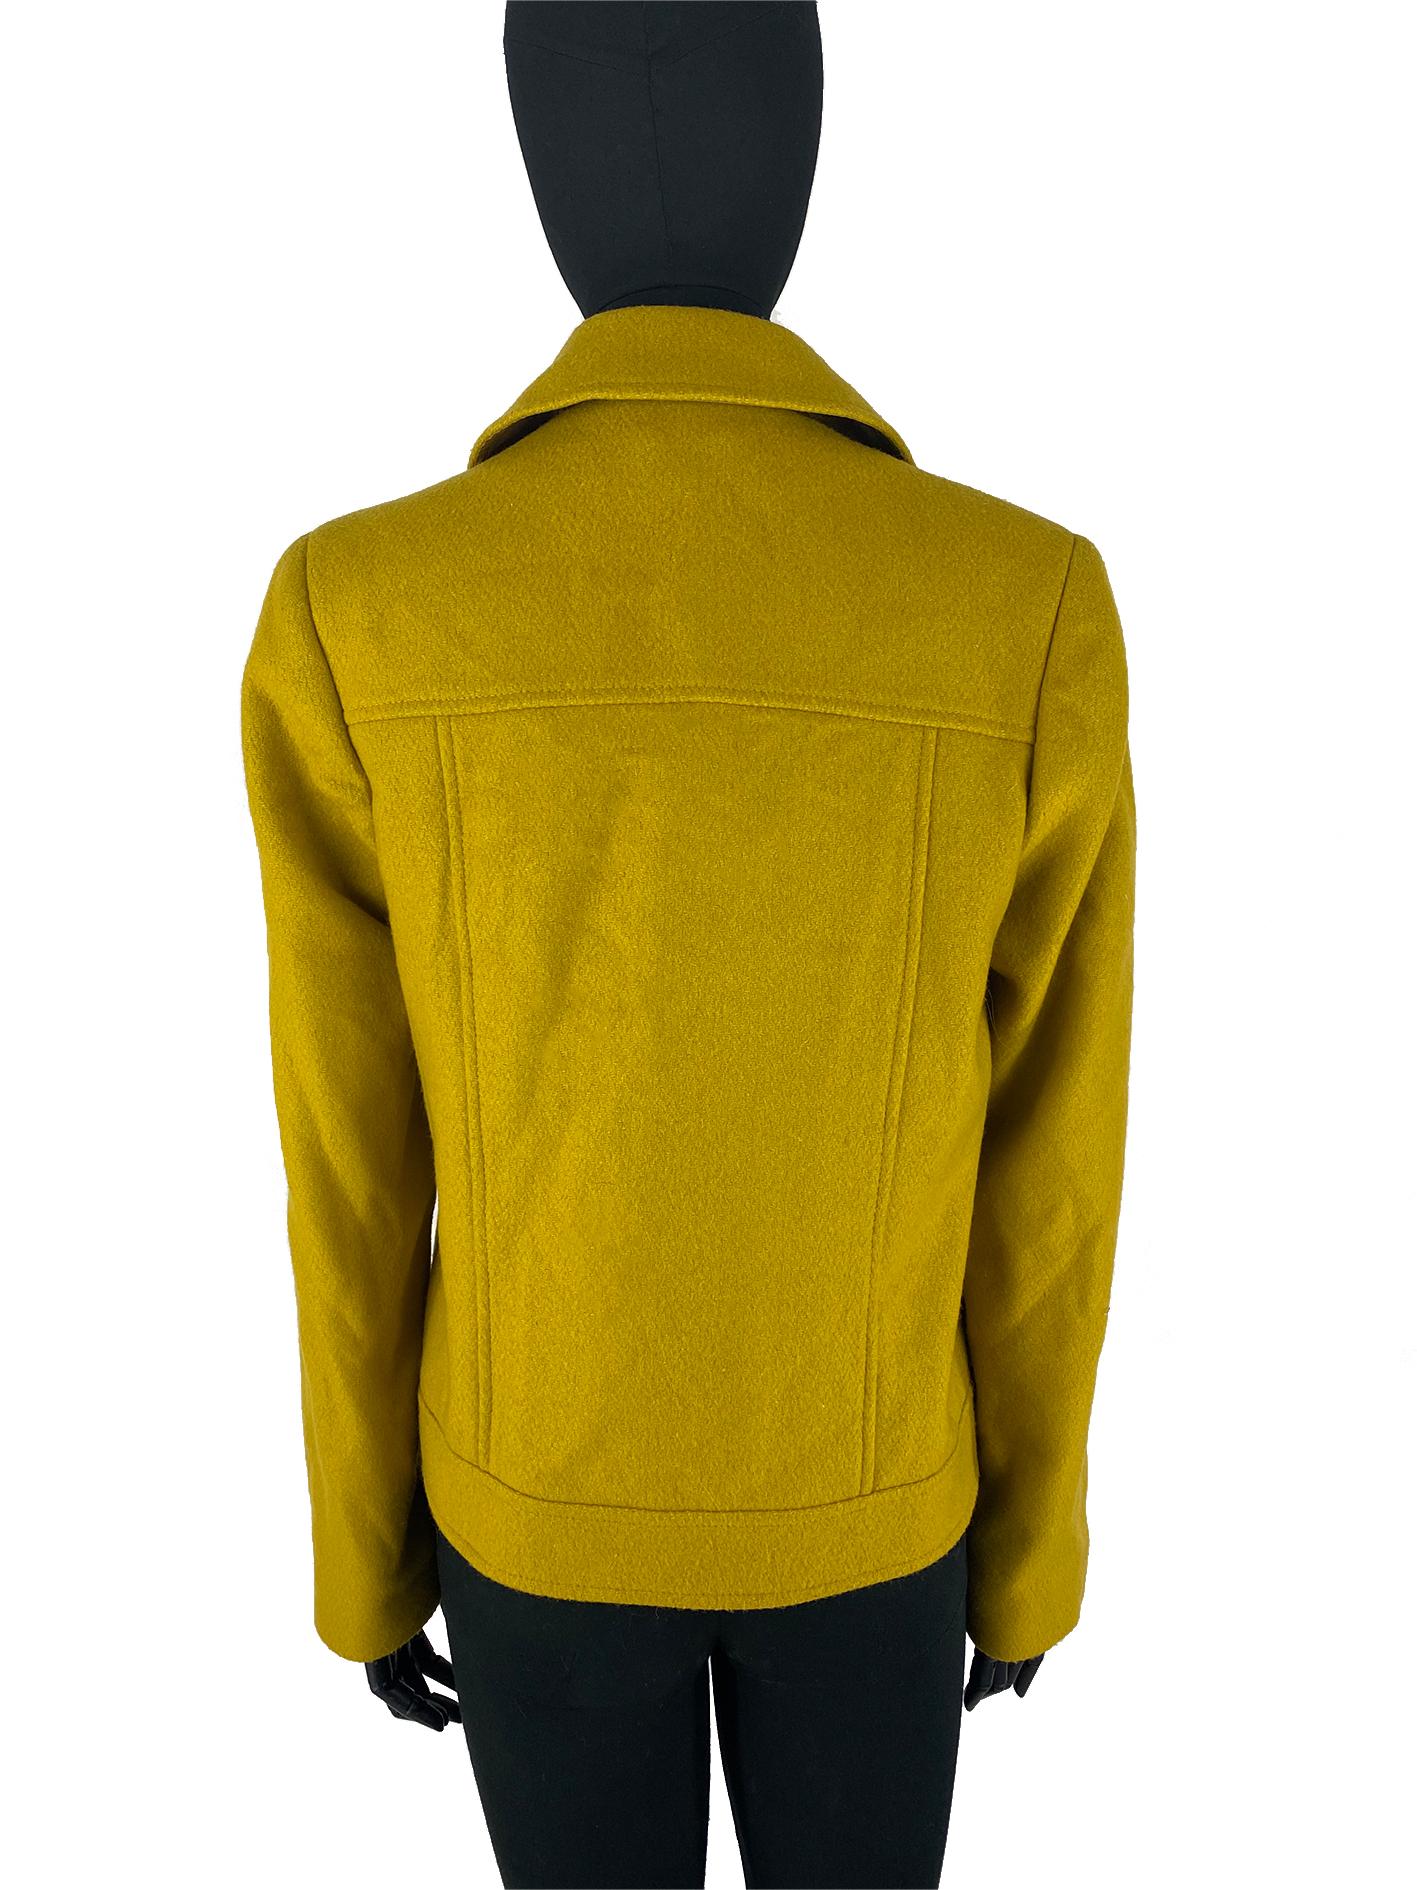 Mulberry Mustard Yellow Wool Jacket In Good Condition For Sale In London, GB